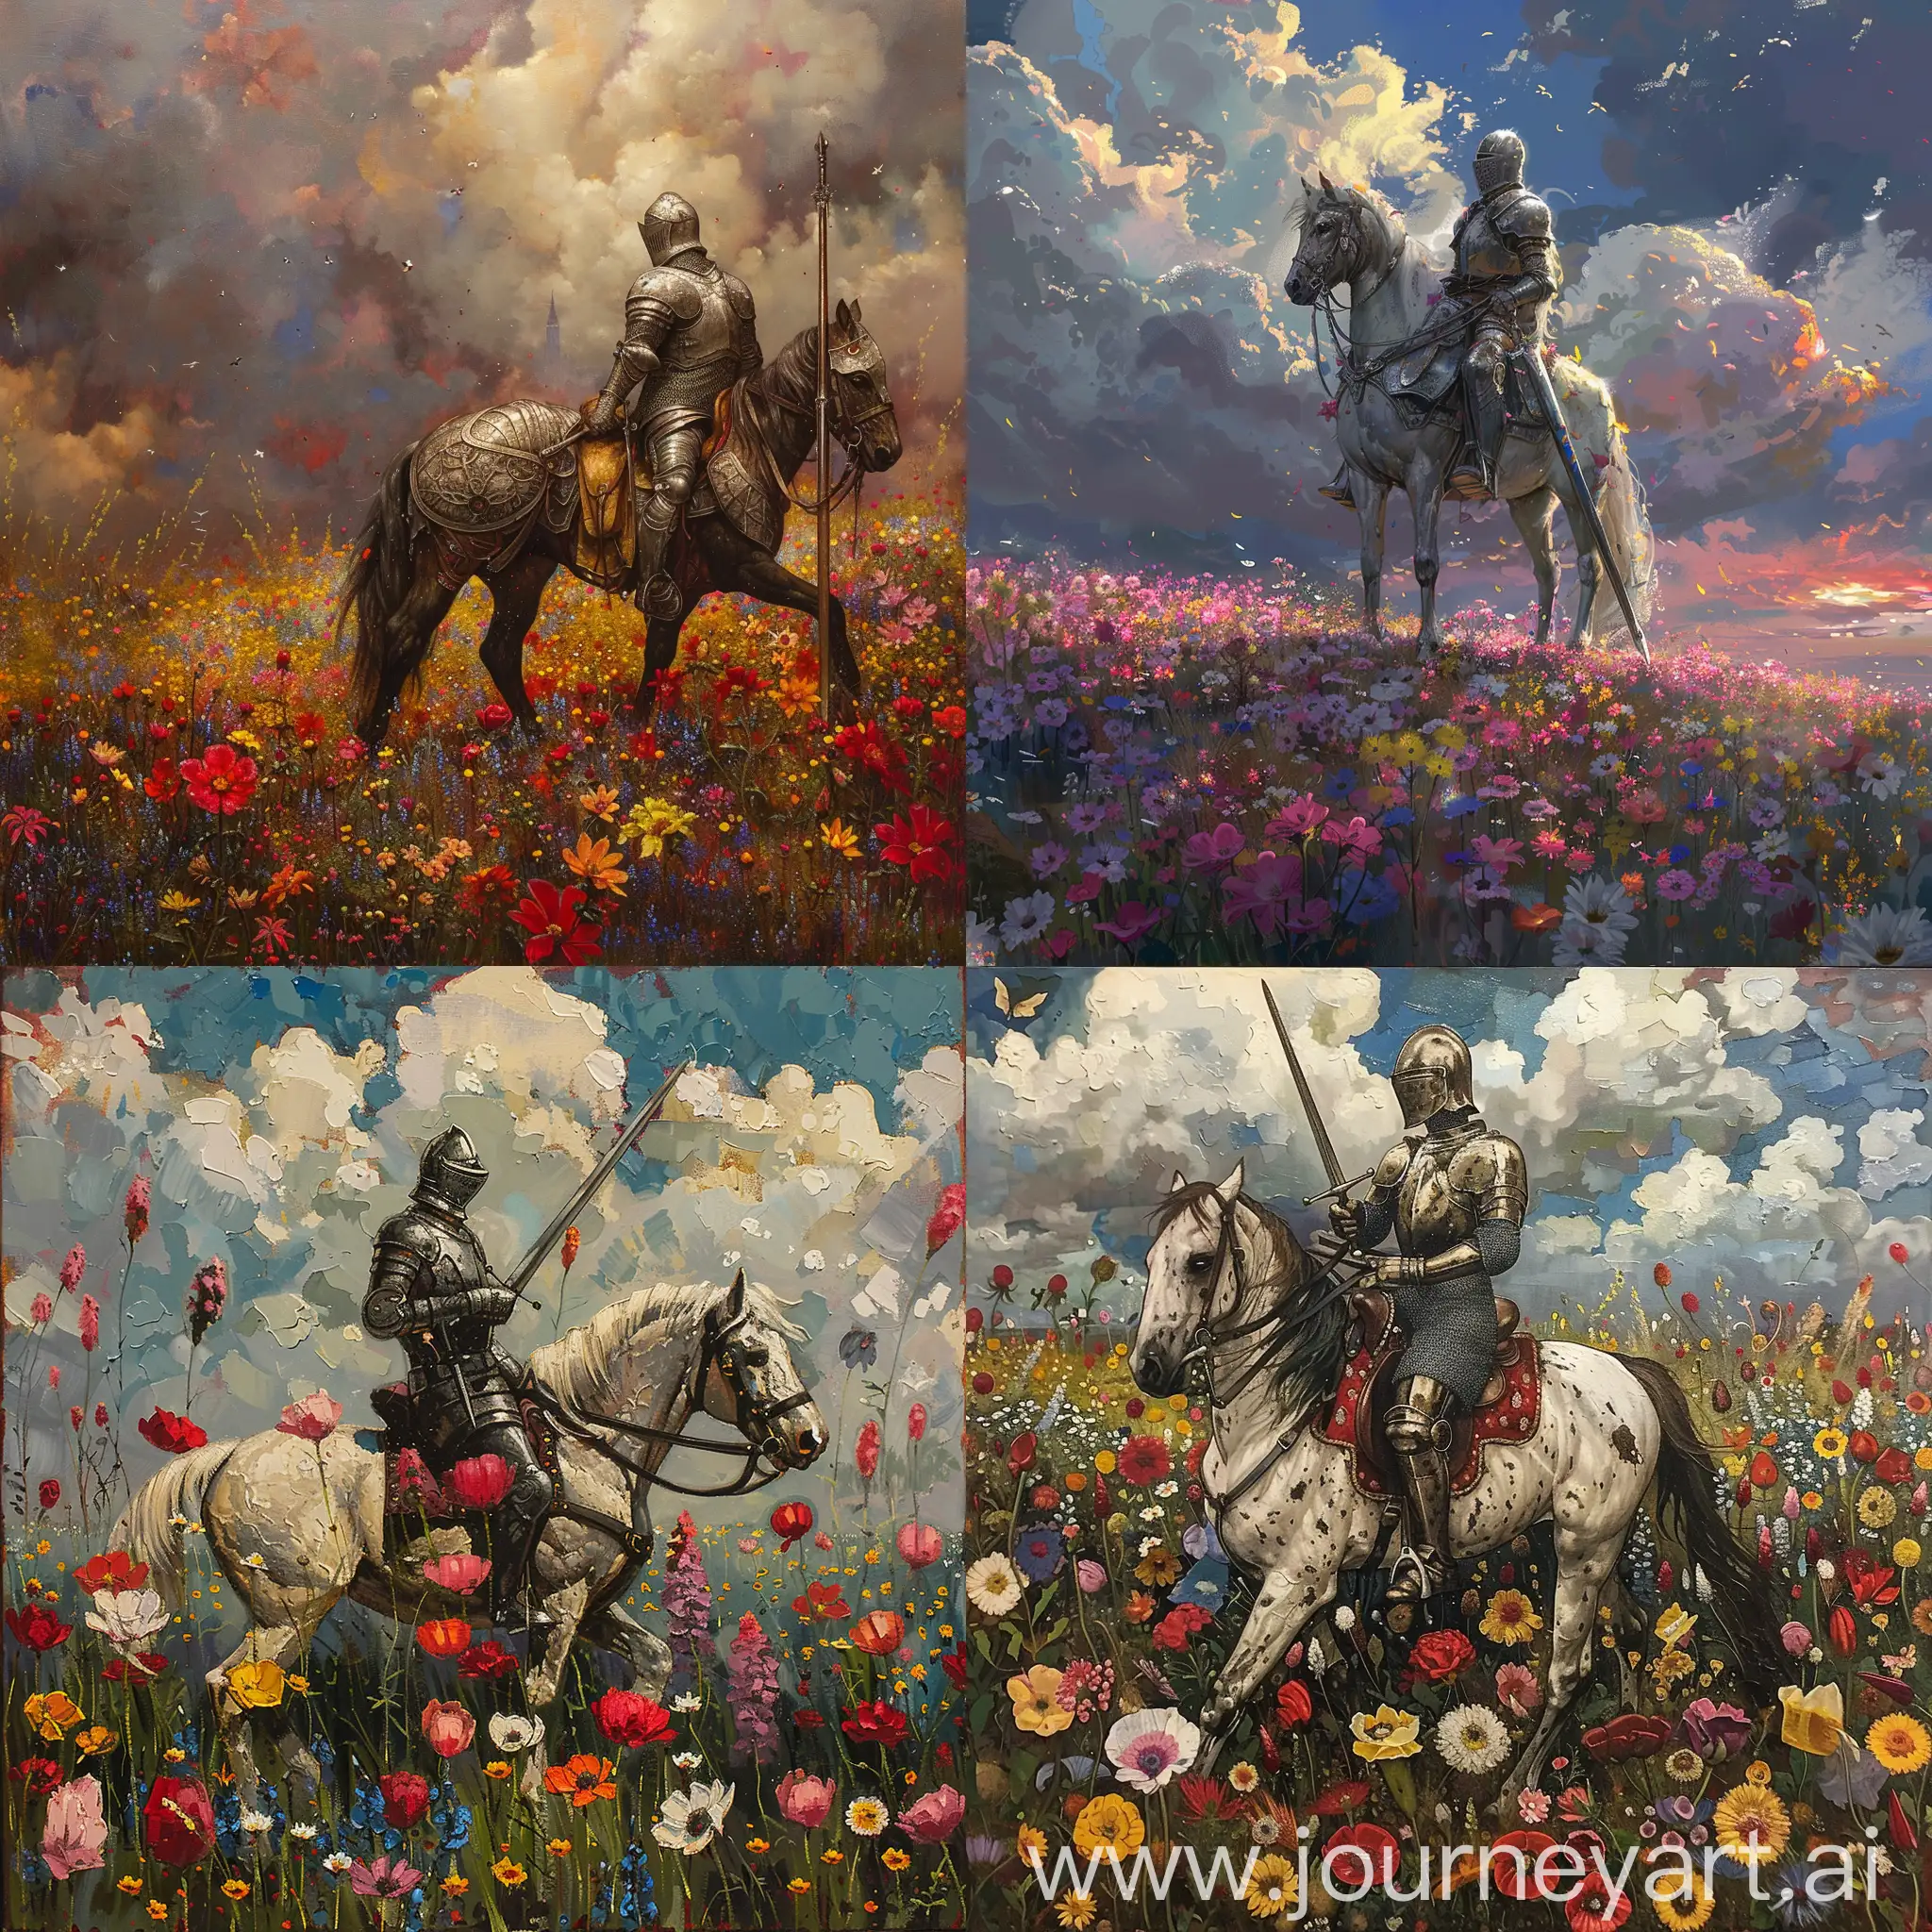 Knight-Riding-Through-a-Field-of-Flowers-at-Sunset